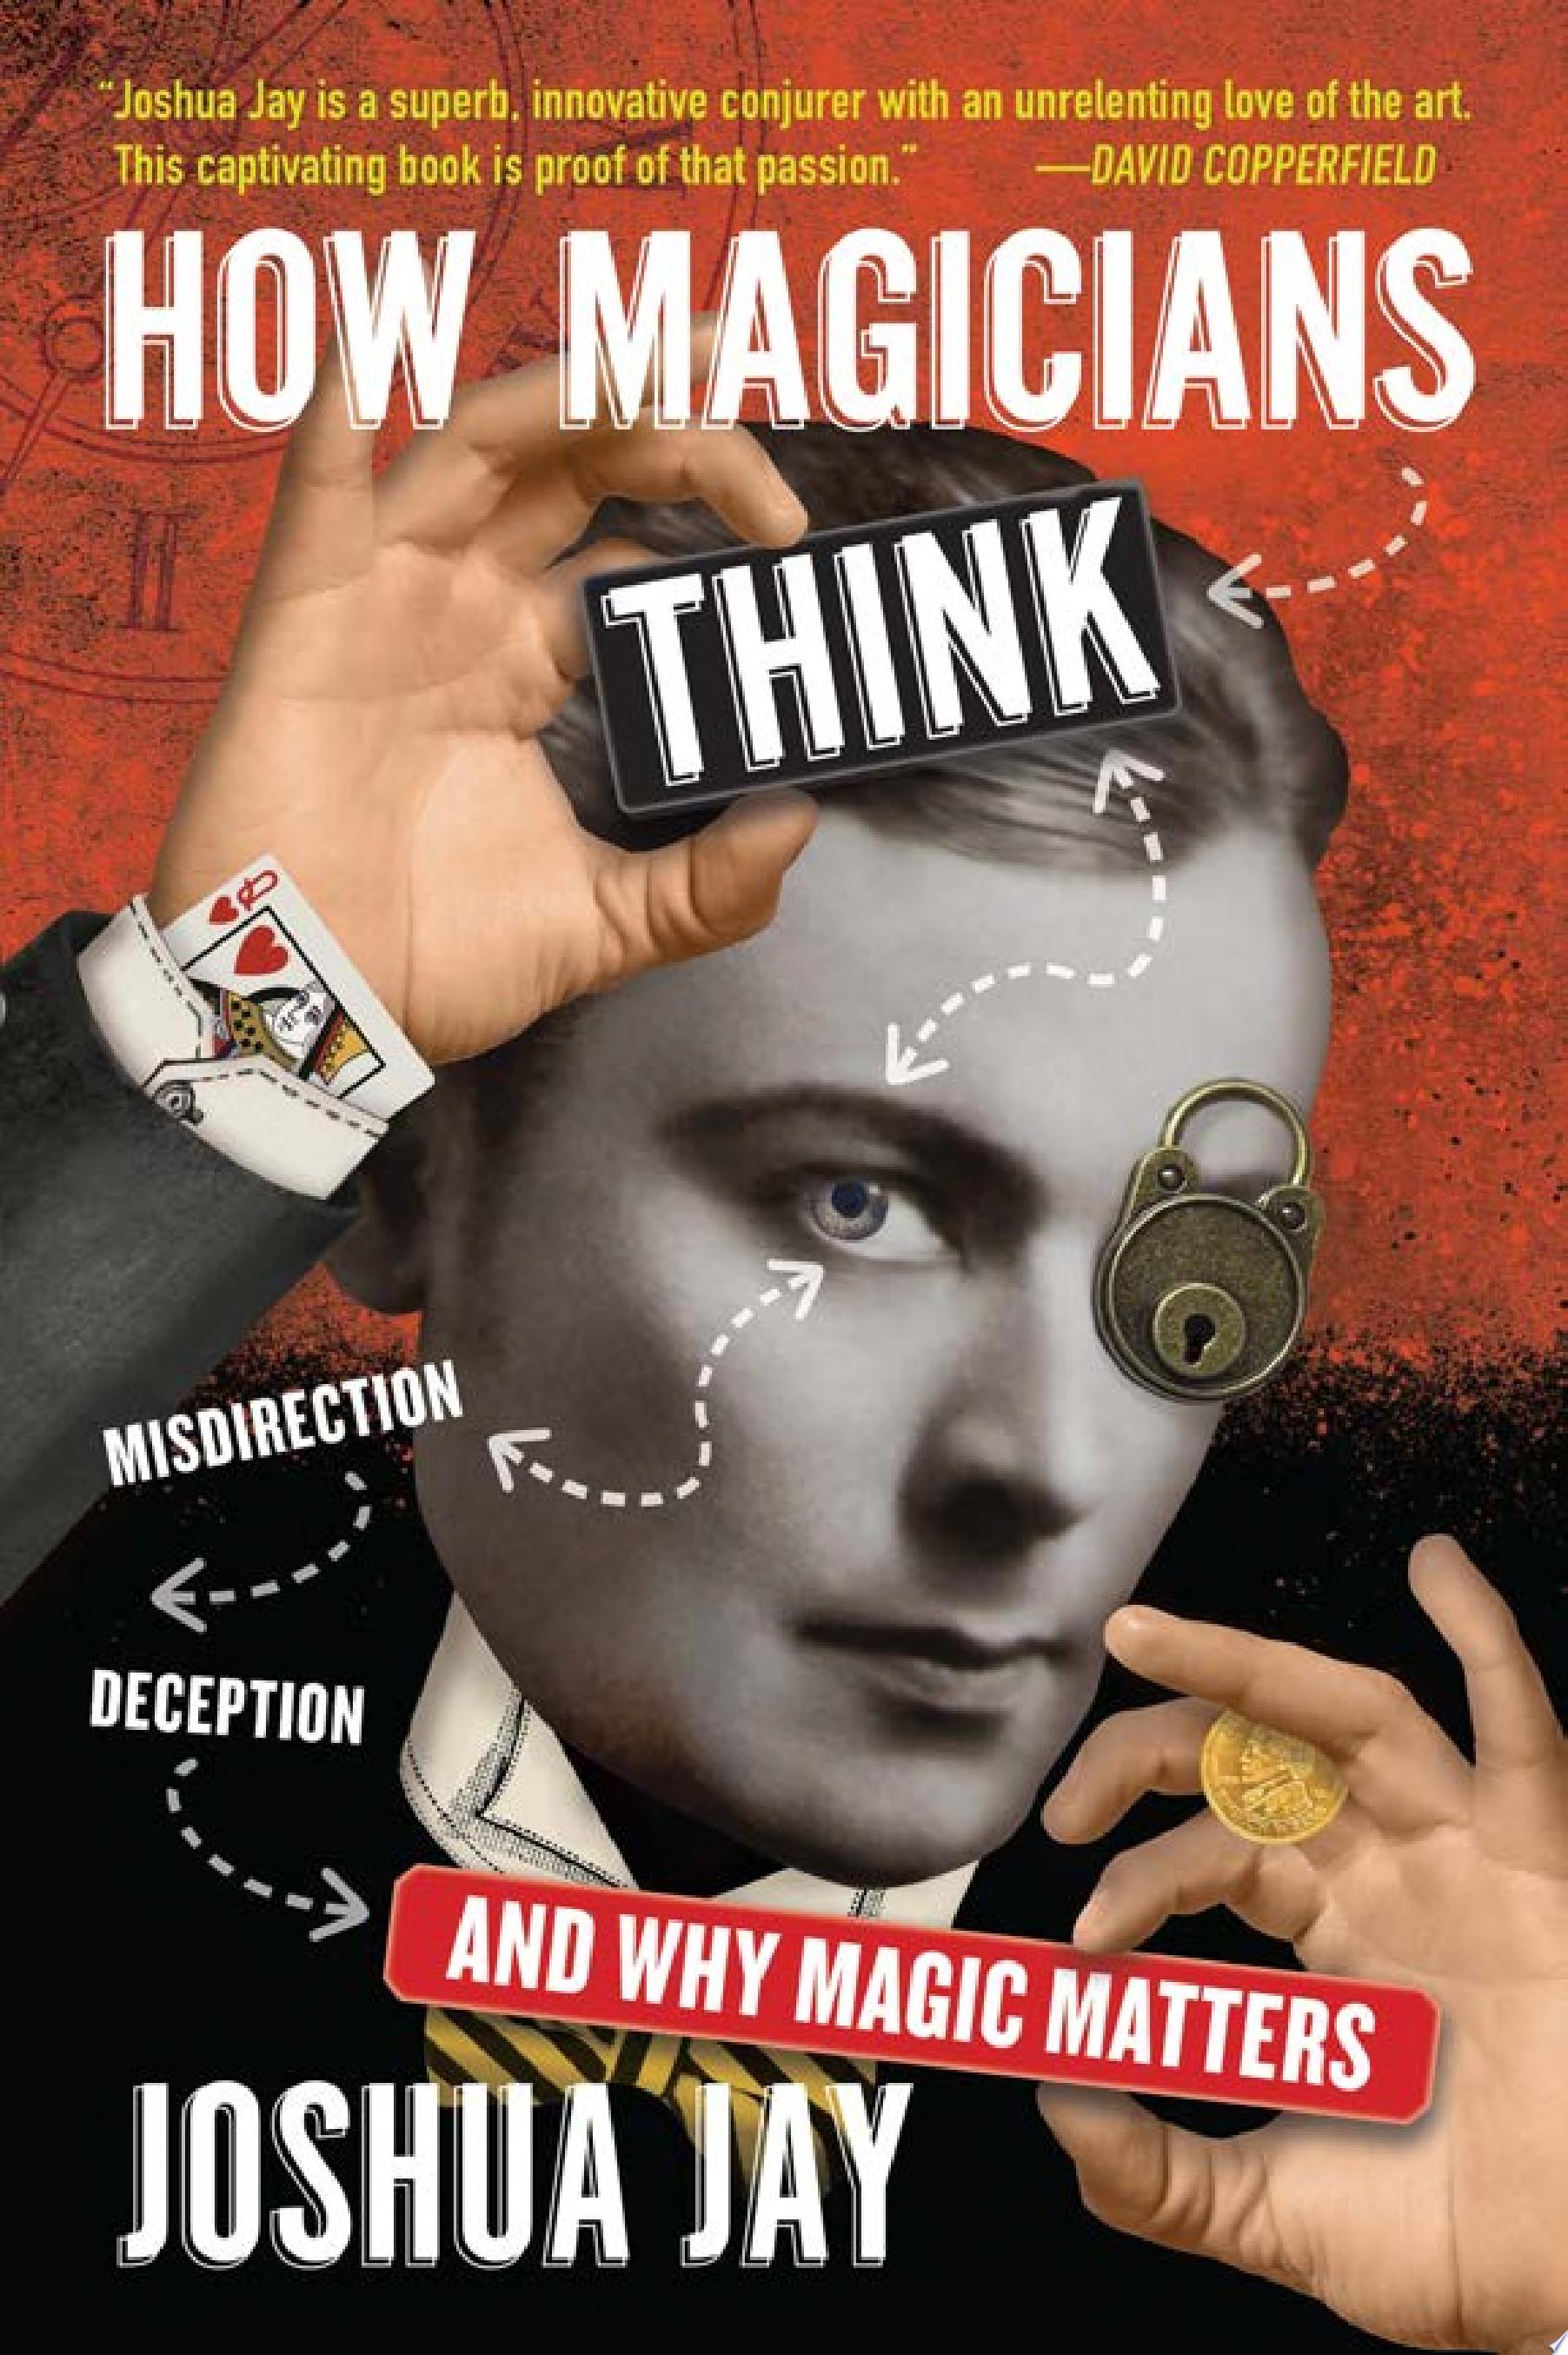 Image for "How Magicians Think"